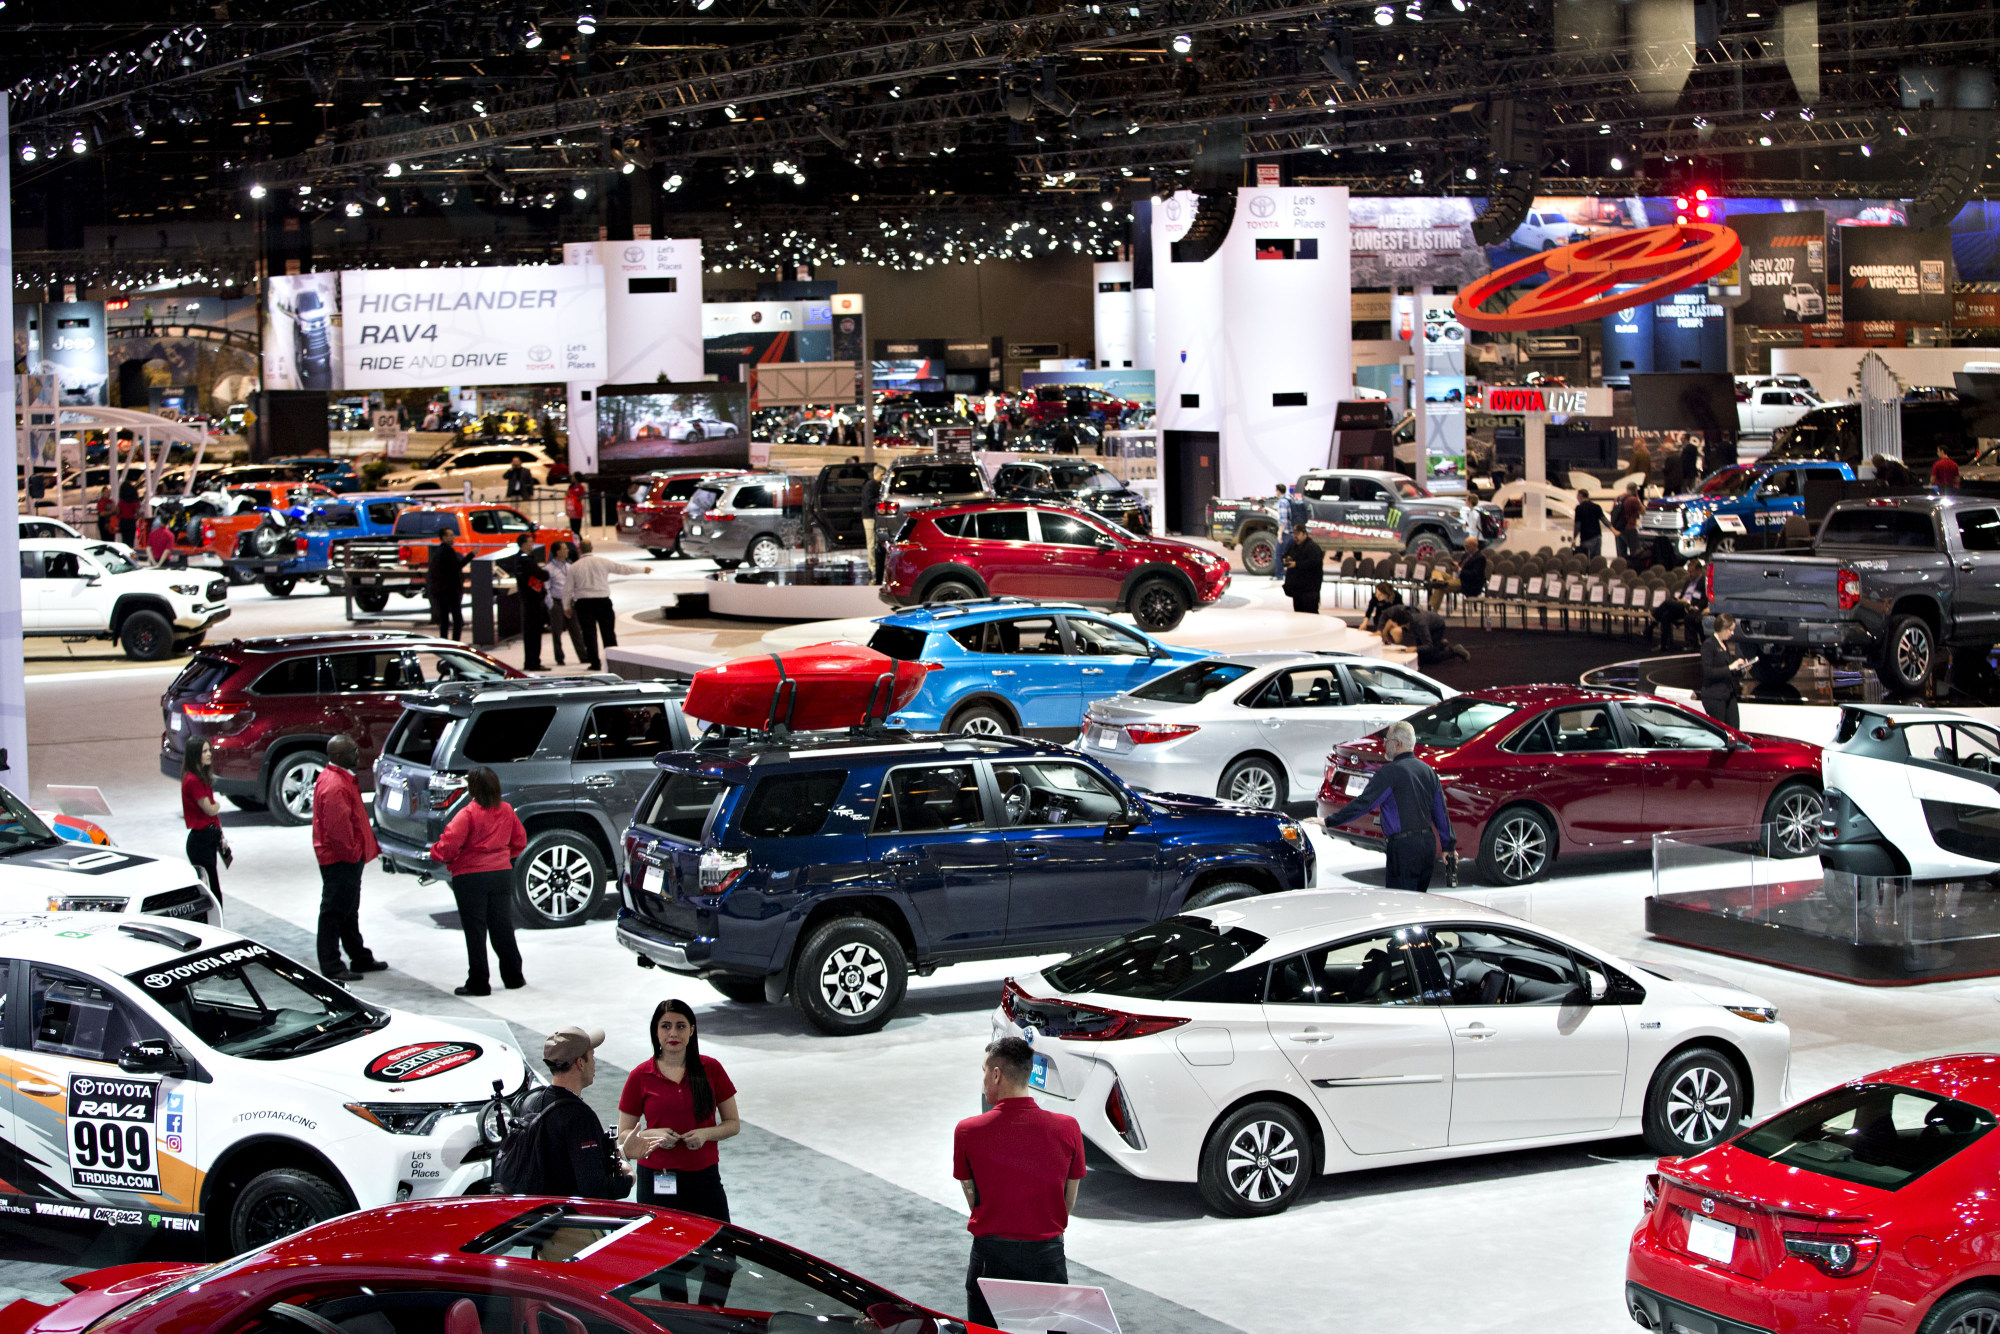 Vehicles sit on display in the Toyota booth, foreground, during the Chicago Auto Show in Chicago, Illinois, U.S., on Thursday, February 9, 2017. Photographer: Daniel Acker/Bloomberg